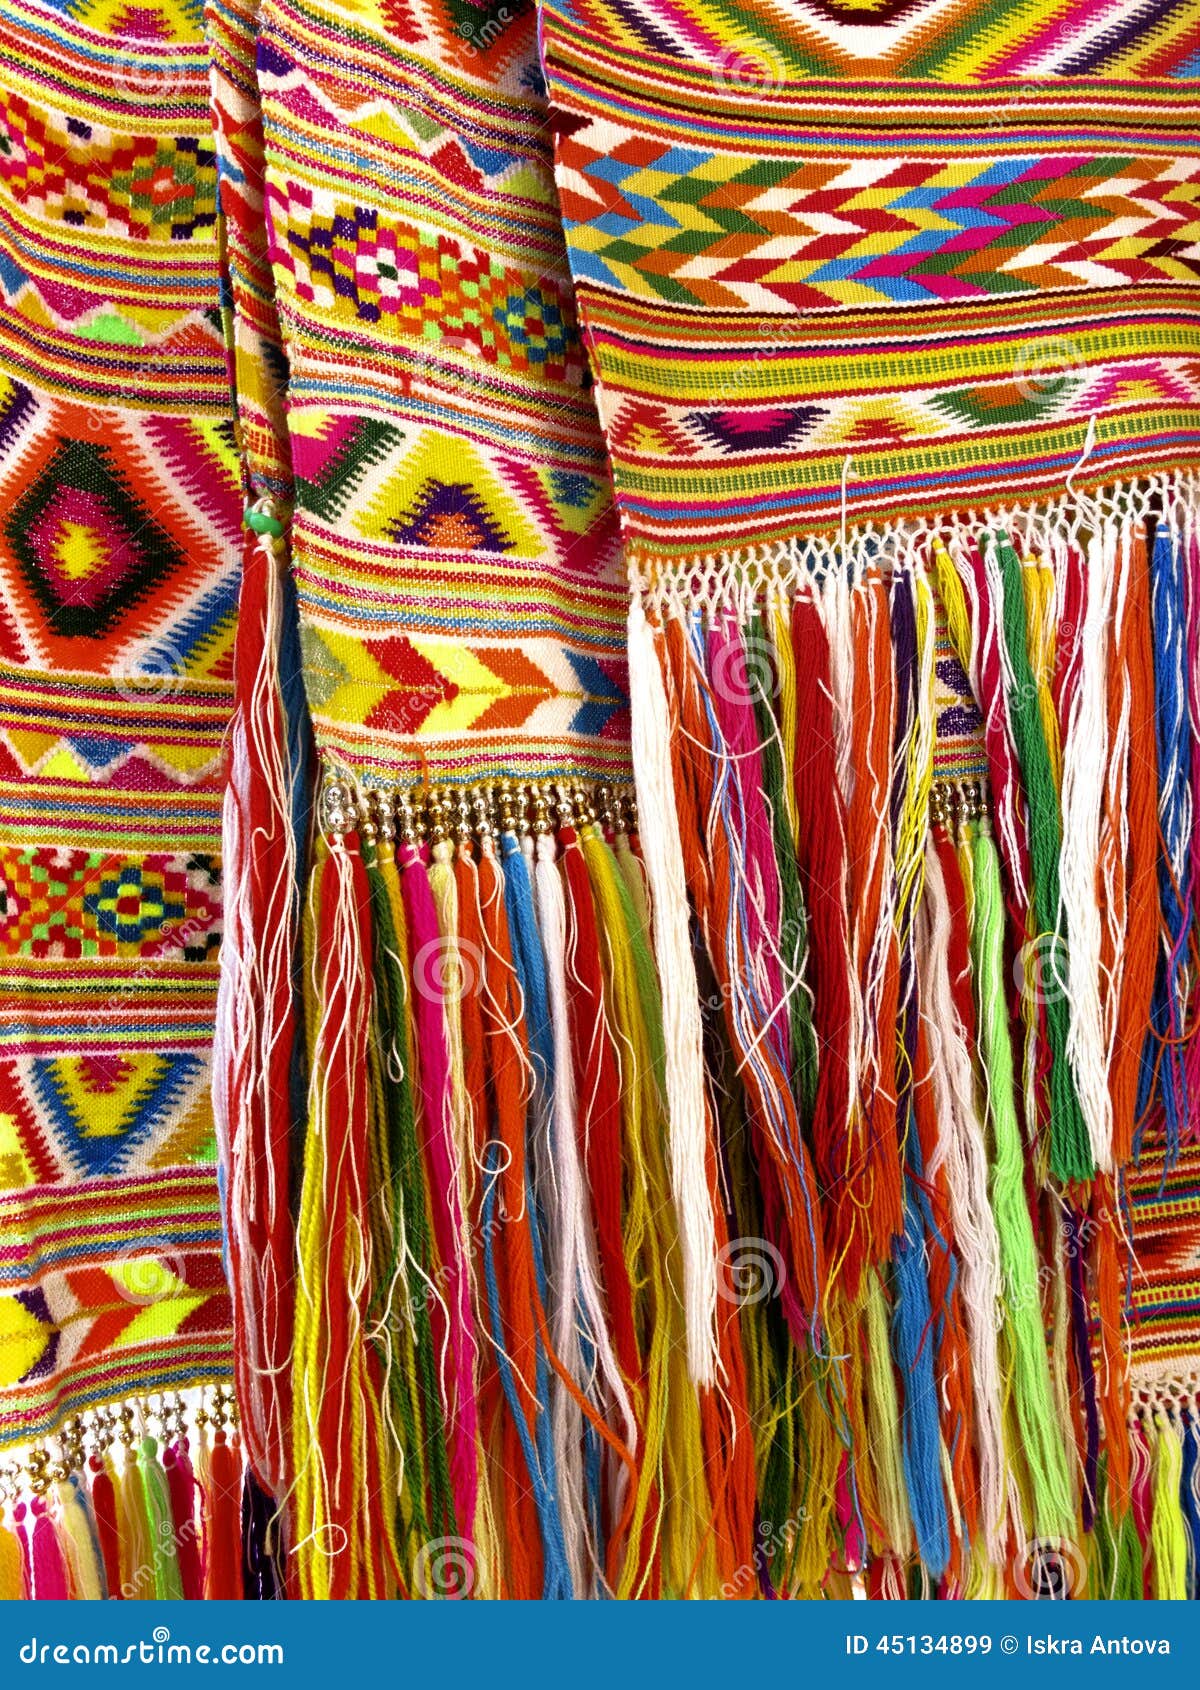 colourful fringes - part of beautiful handmade craft